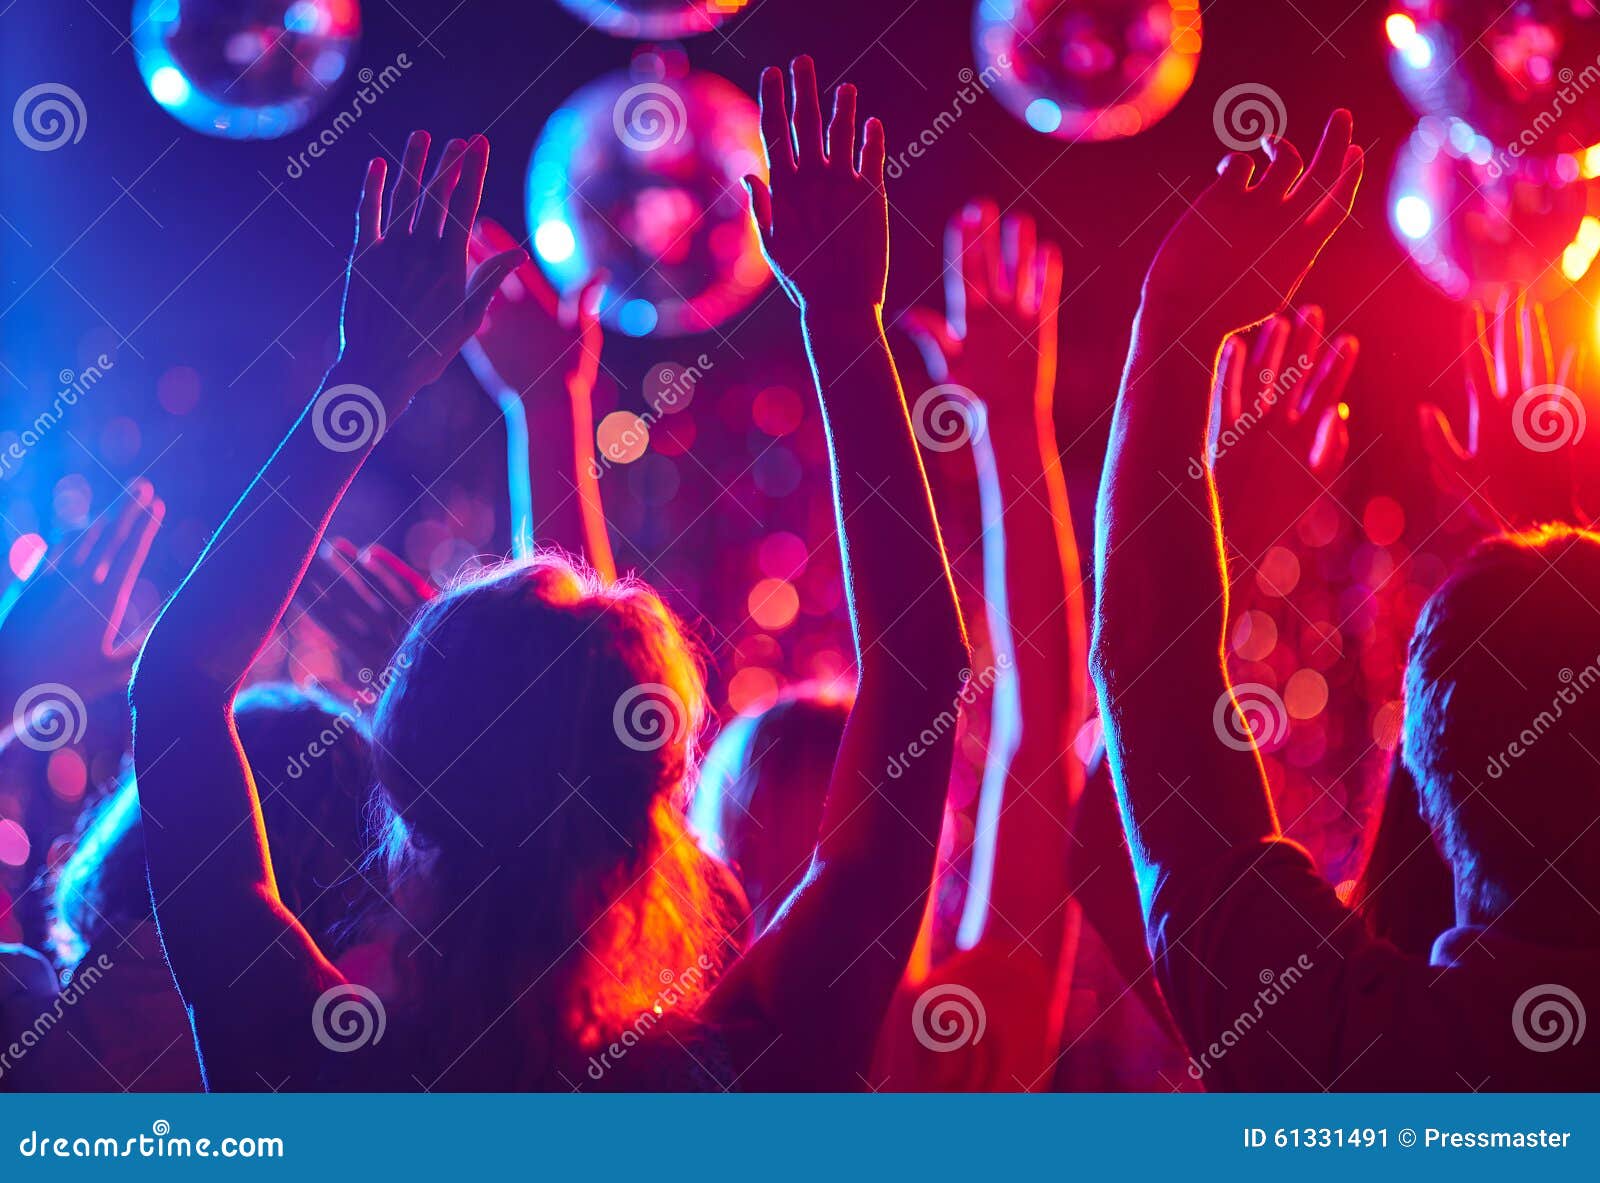 Dancing crowd stock image. Image of friend, clubbing - 61331491